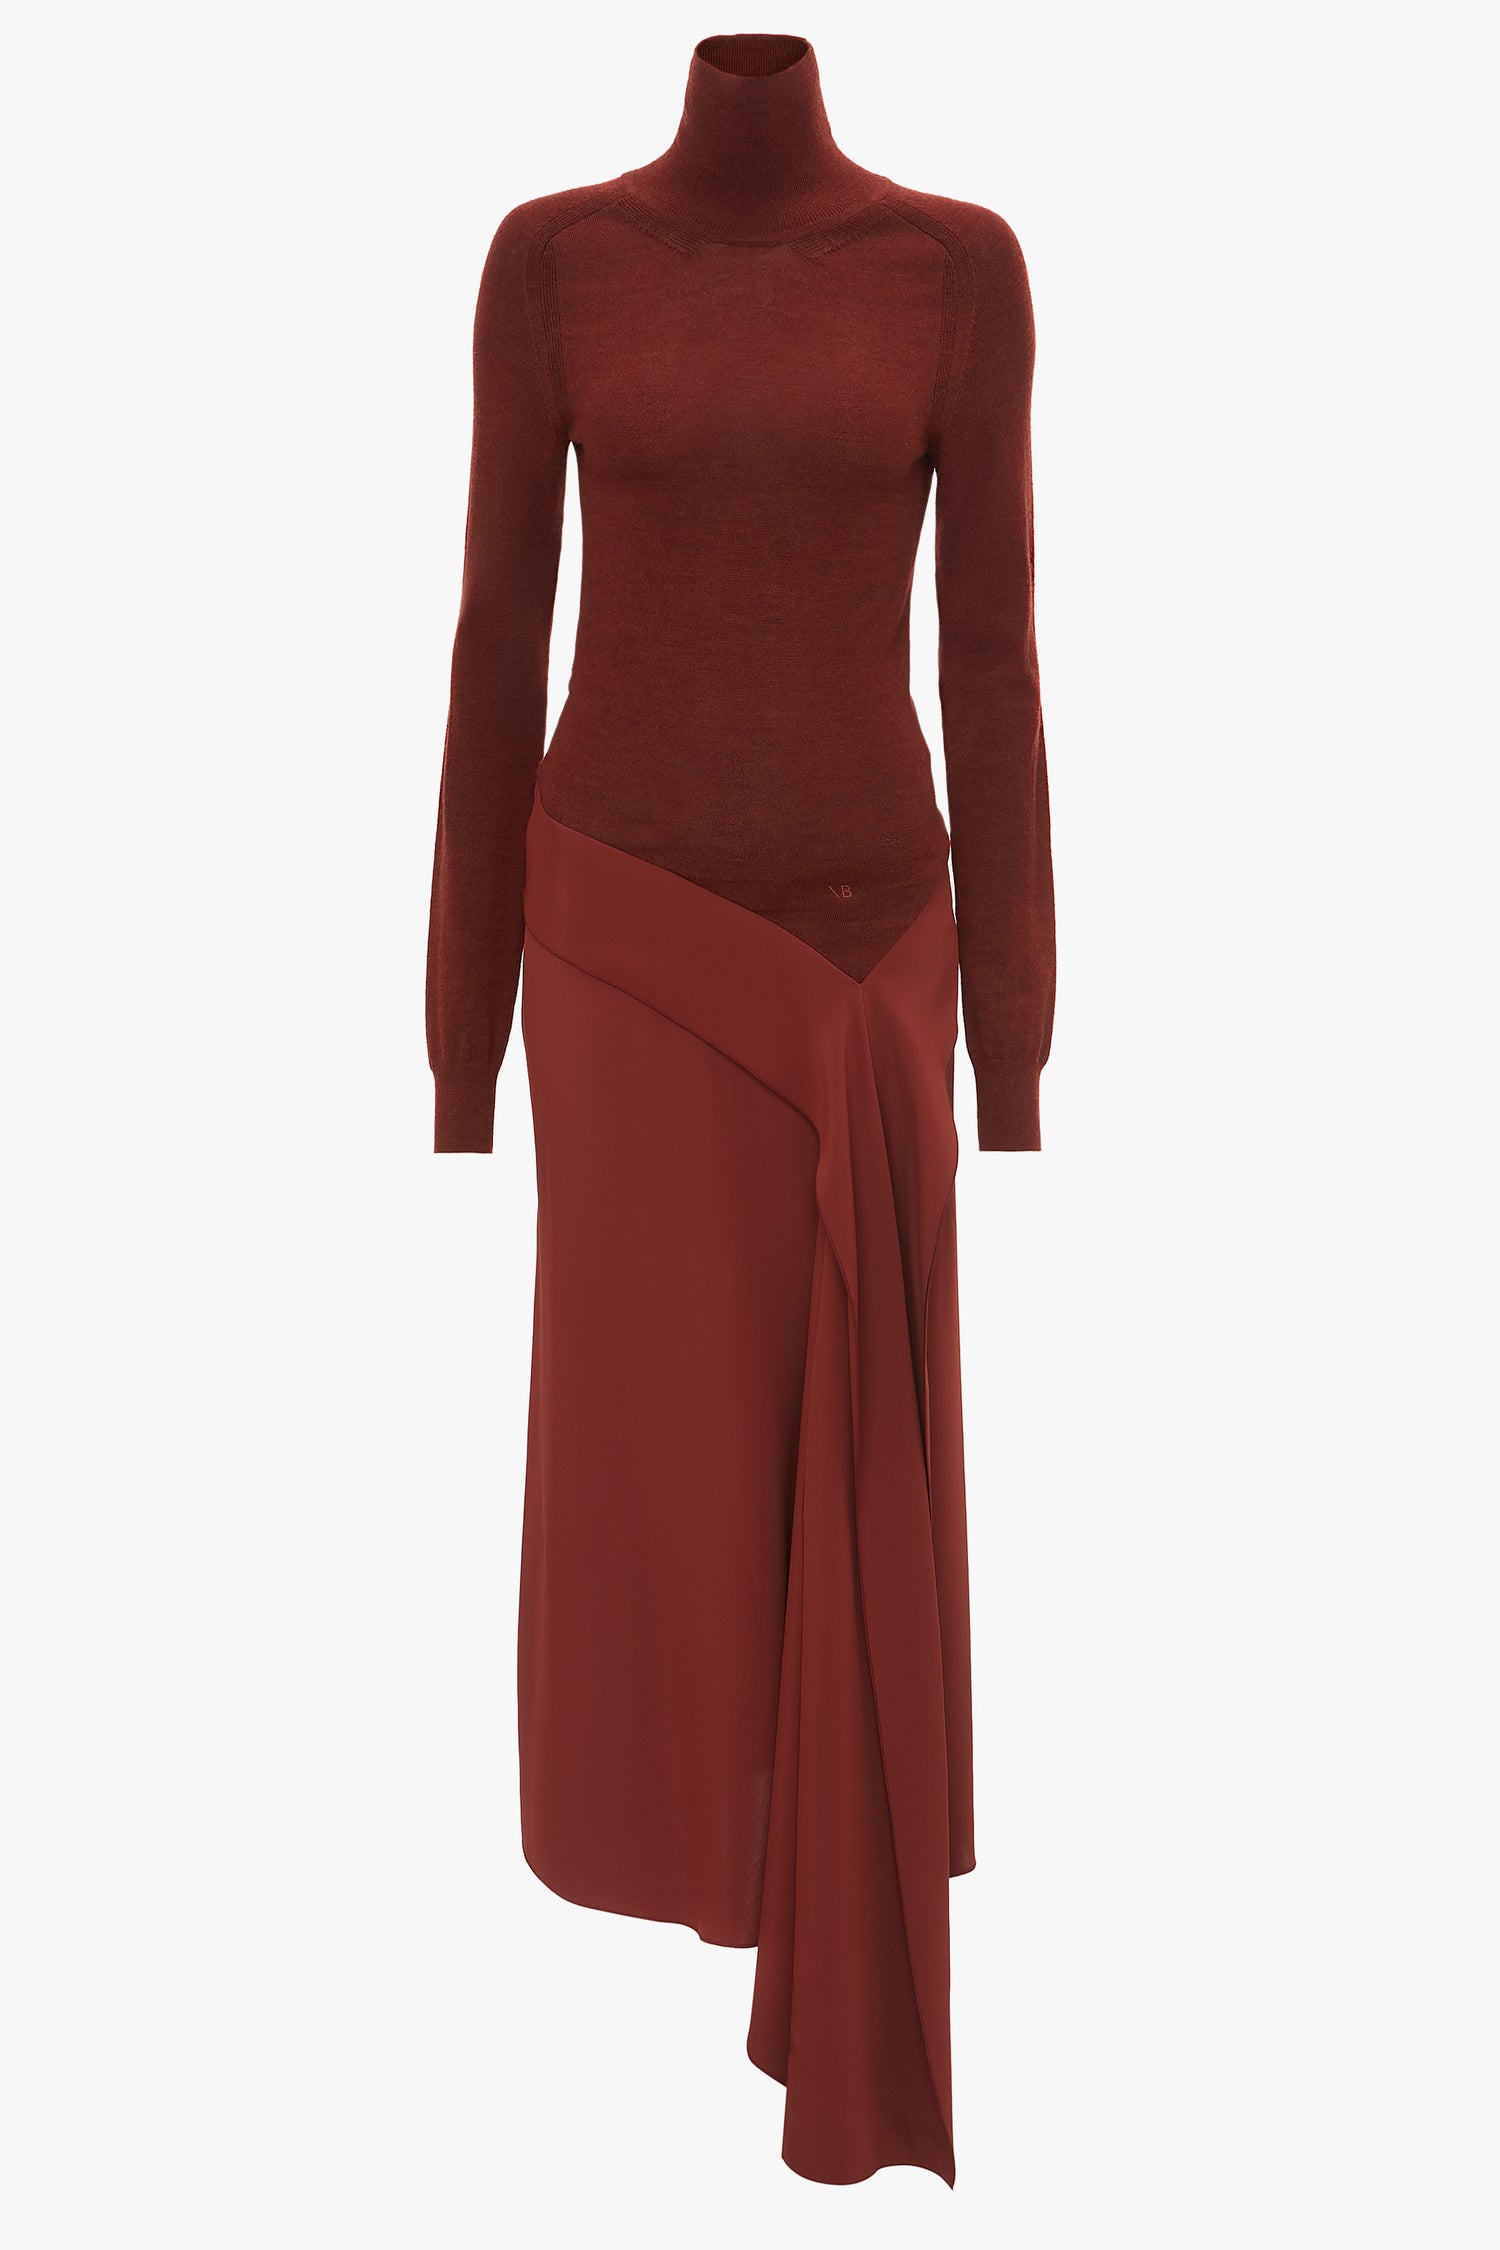 A mannequin dressed in a dark red, long-sleeved High Neck Tie Detail Dress In Russet by Victoria Beckham.